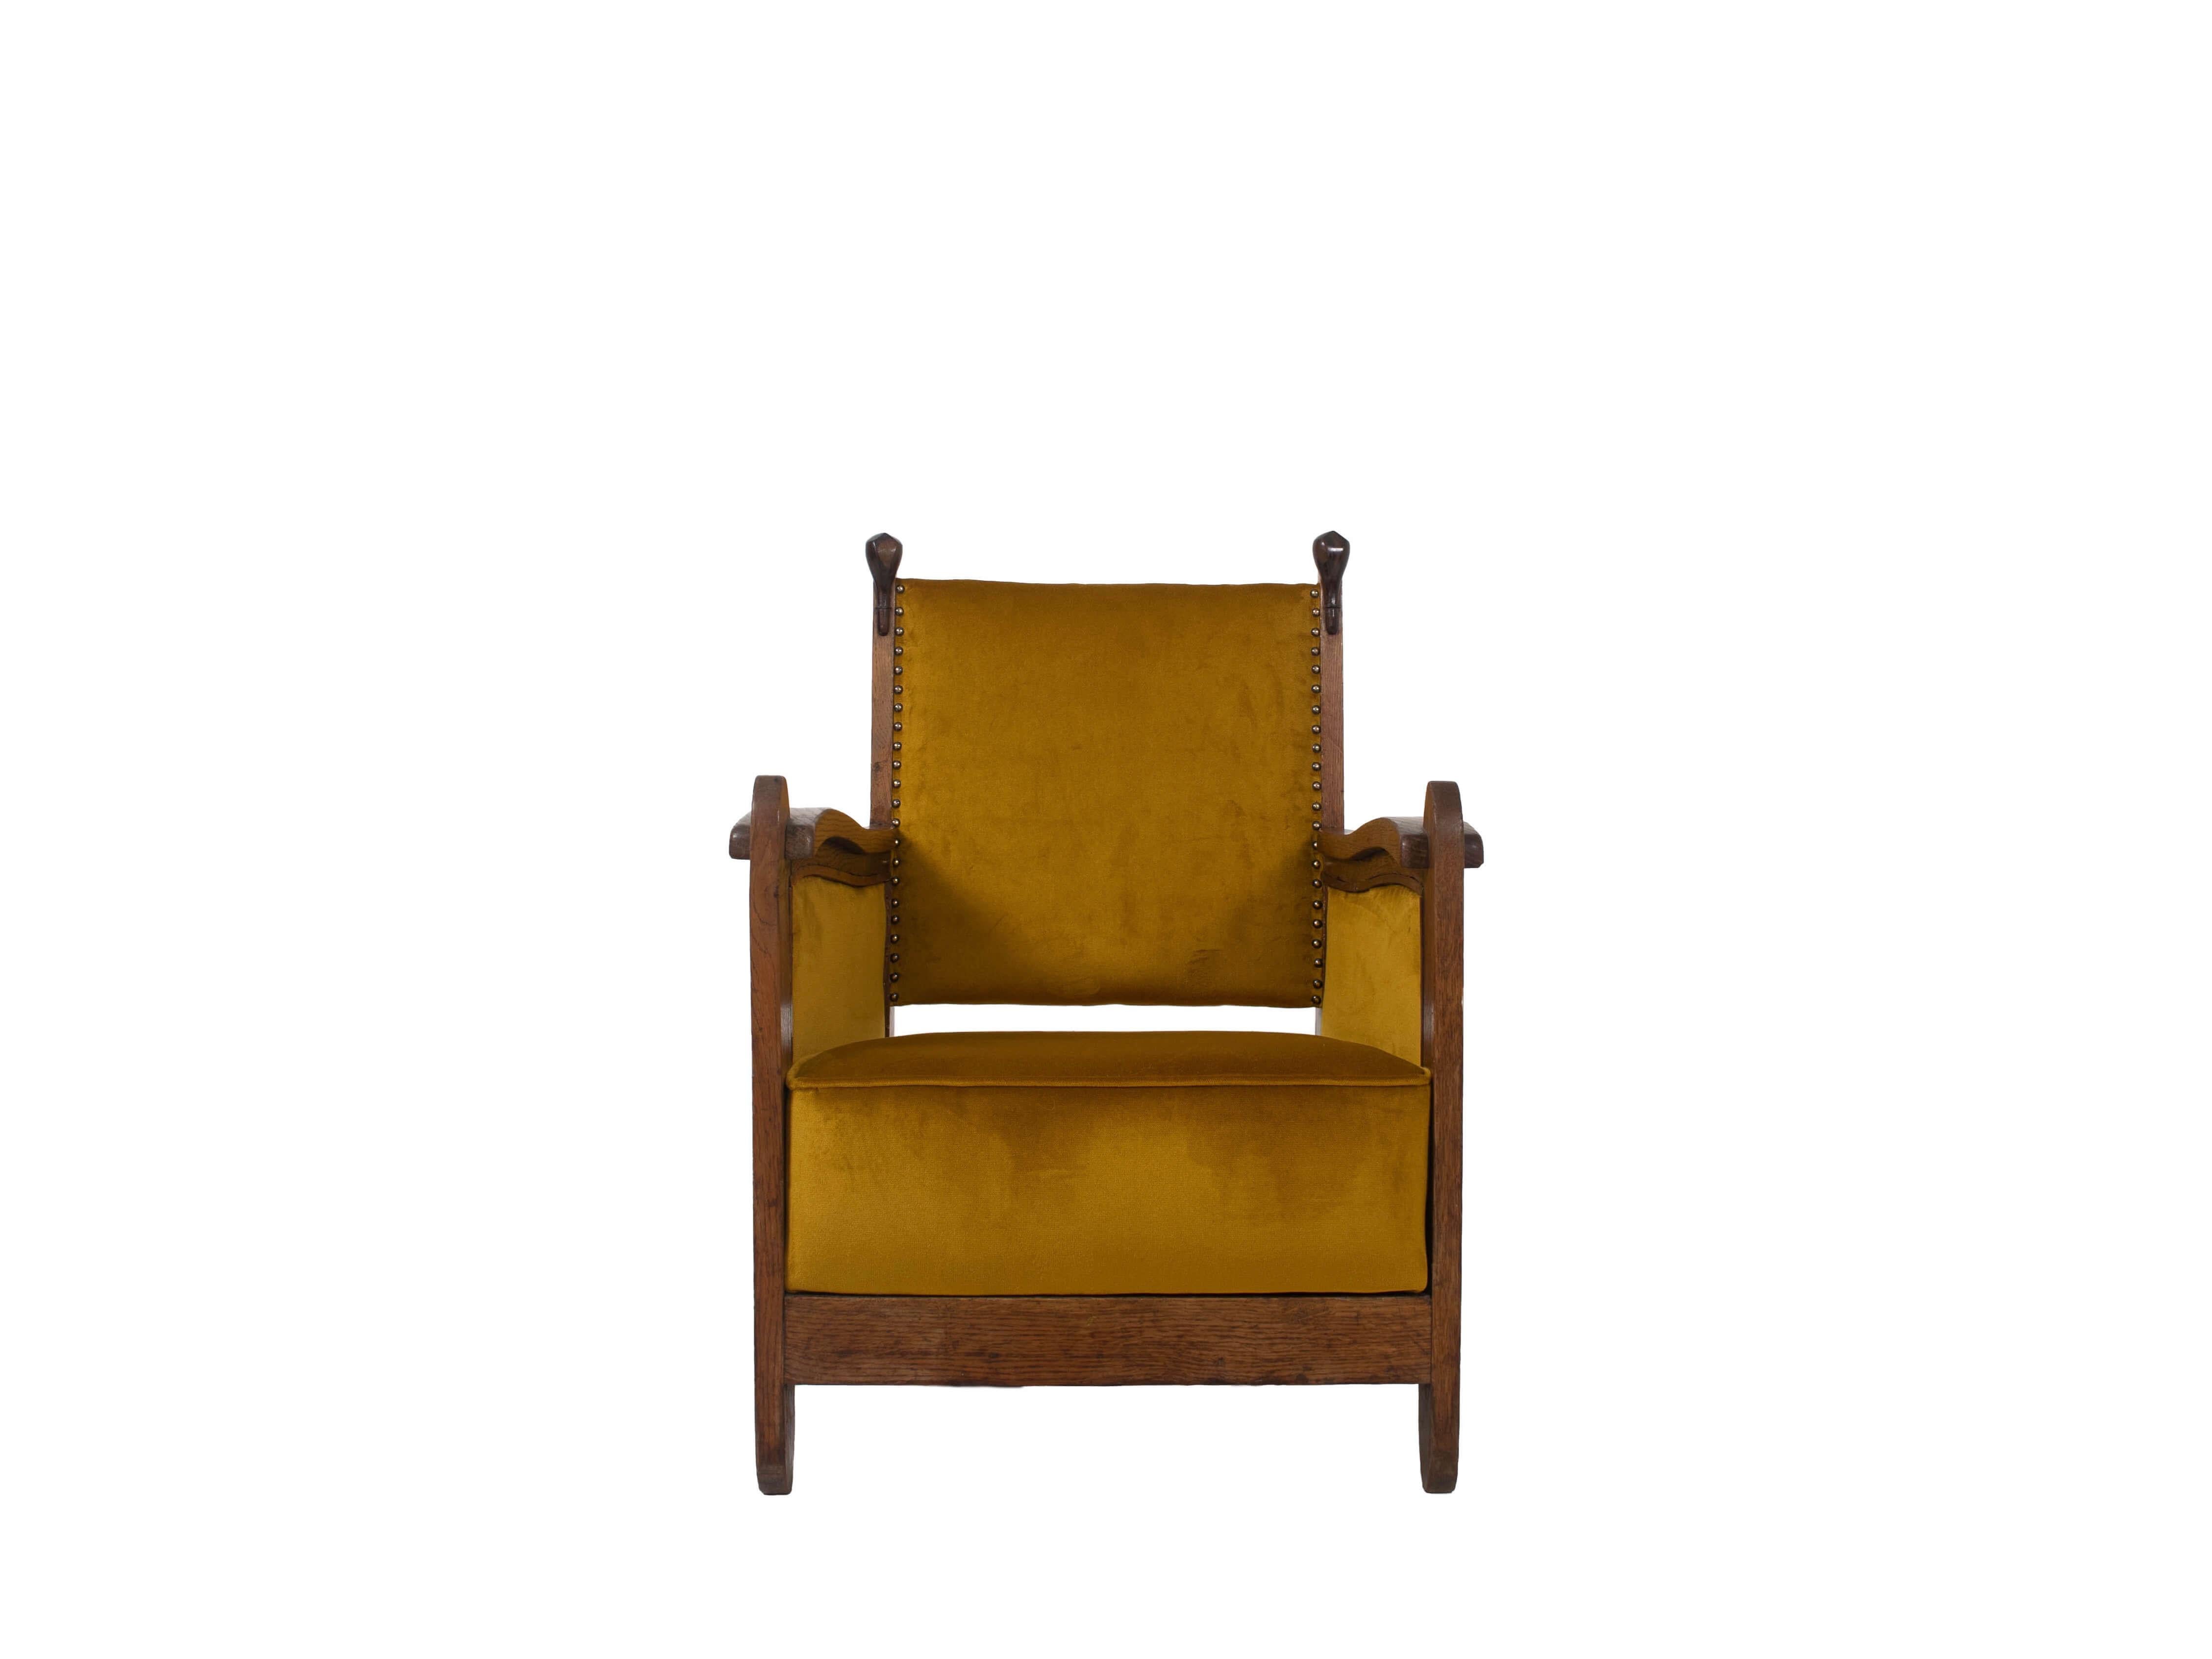 Truly amazing Amsterdam School armchair from The Netherlands around the 1930s. This chair is newly upholstered in a Gold Yellow Fabric that colors beautifully with the Oak and Coromandel wood. The eye-catcher of this chair is the two wooden 'bulbs'